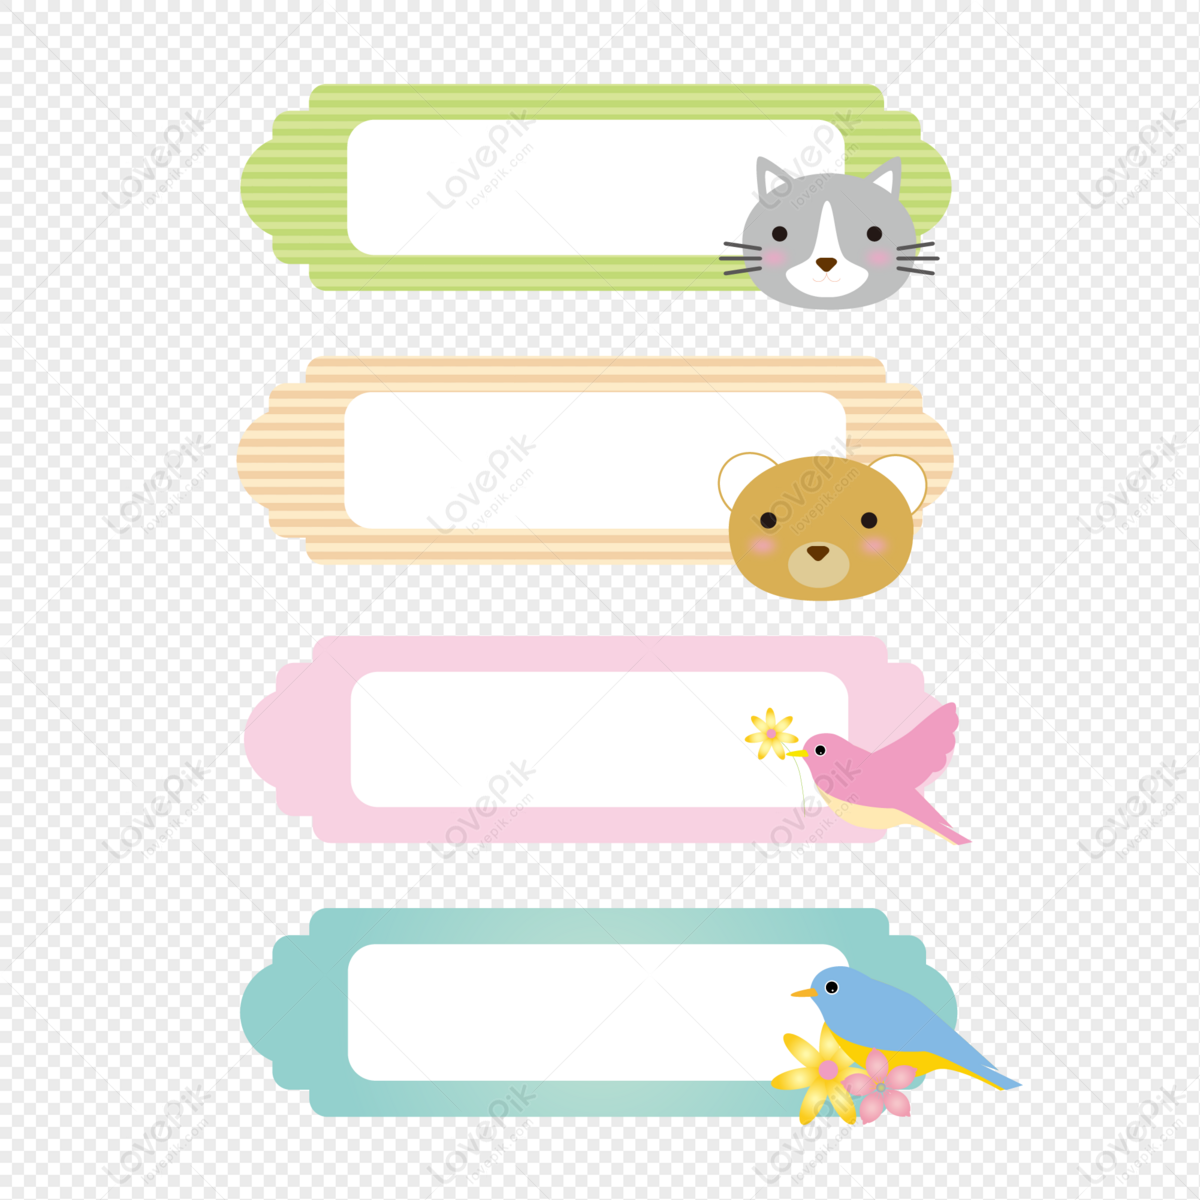 Animal Label Border PNG Transparent Image And Clipart Image For Free  Download - Lovepik | 401496807